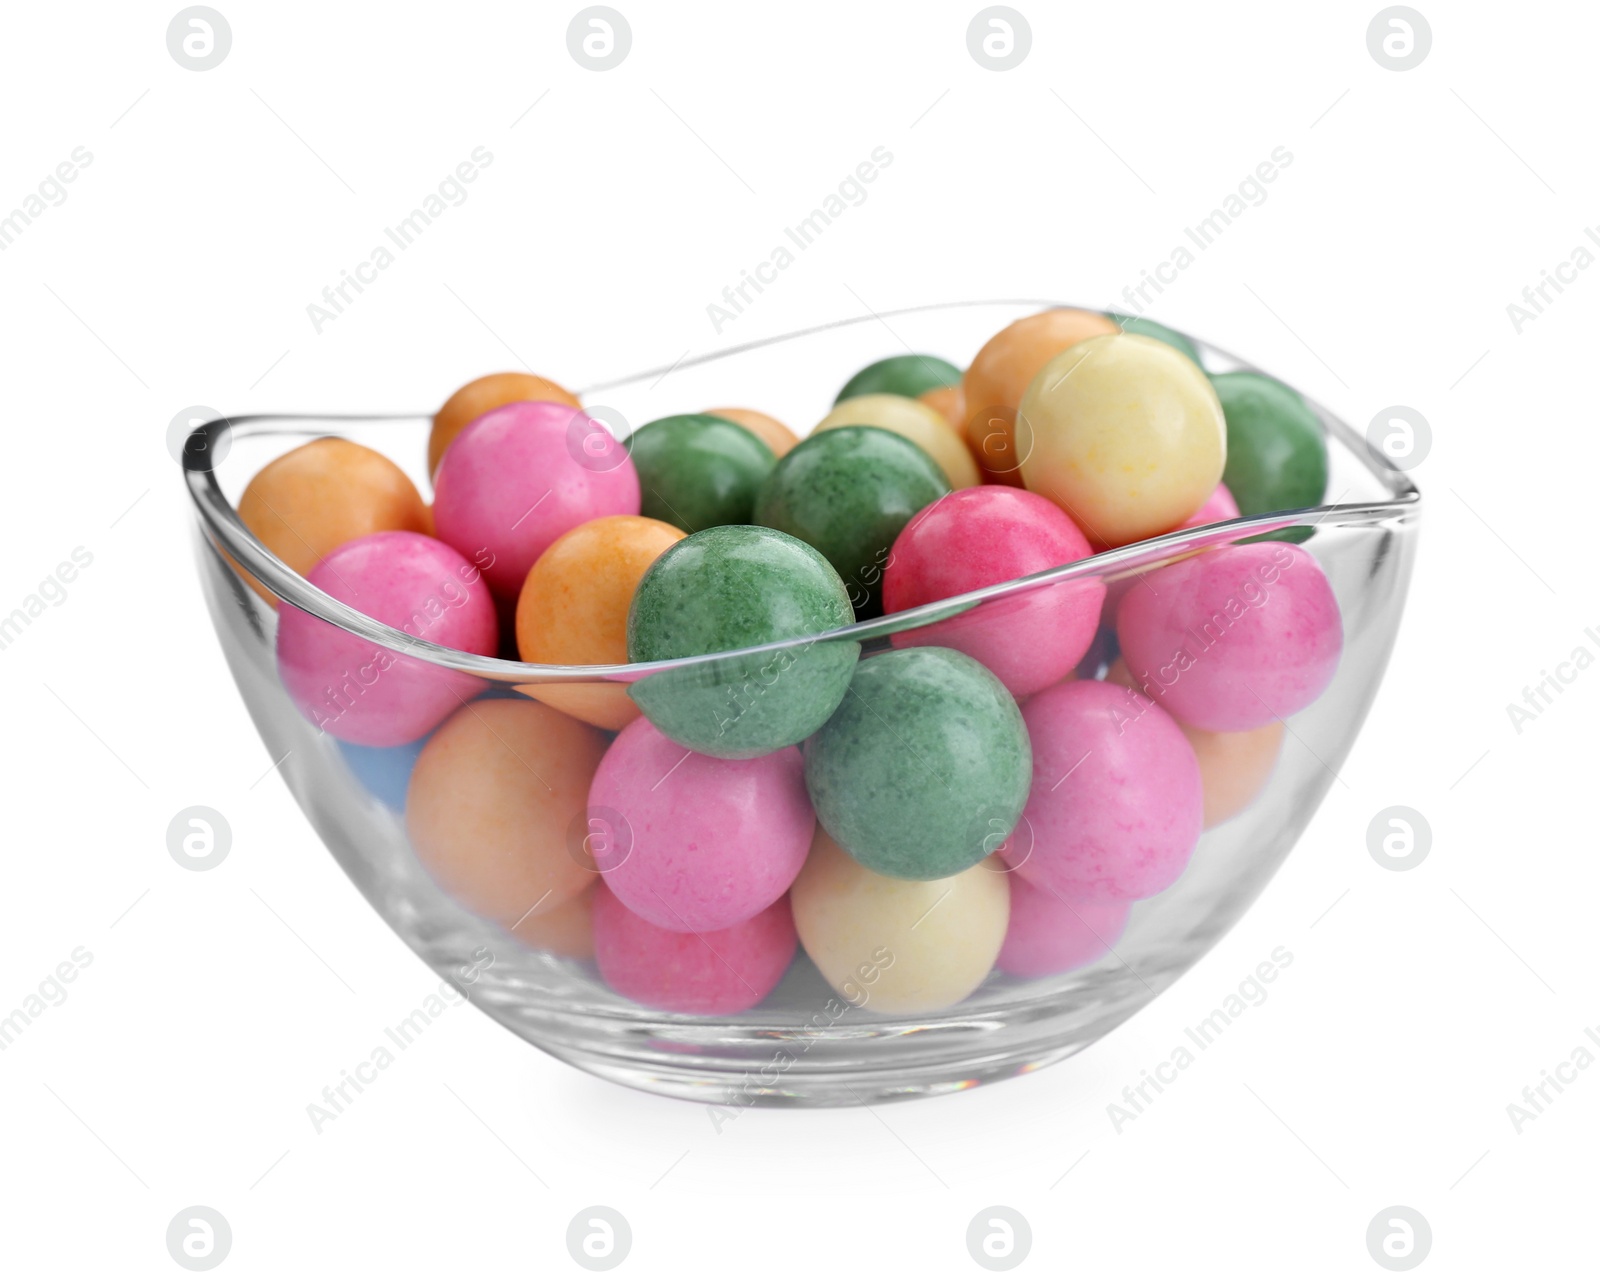 Photo of Bowl with many bright gumballs isolated on white